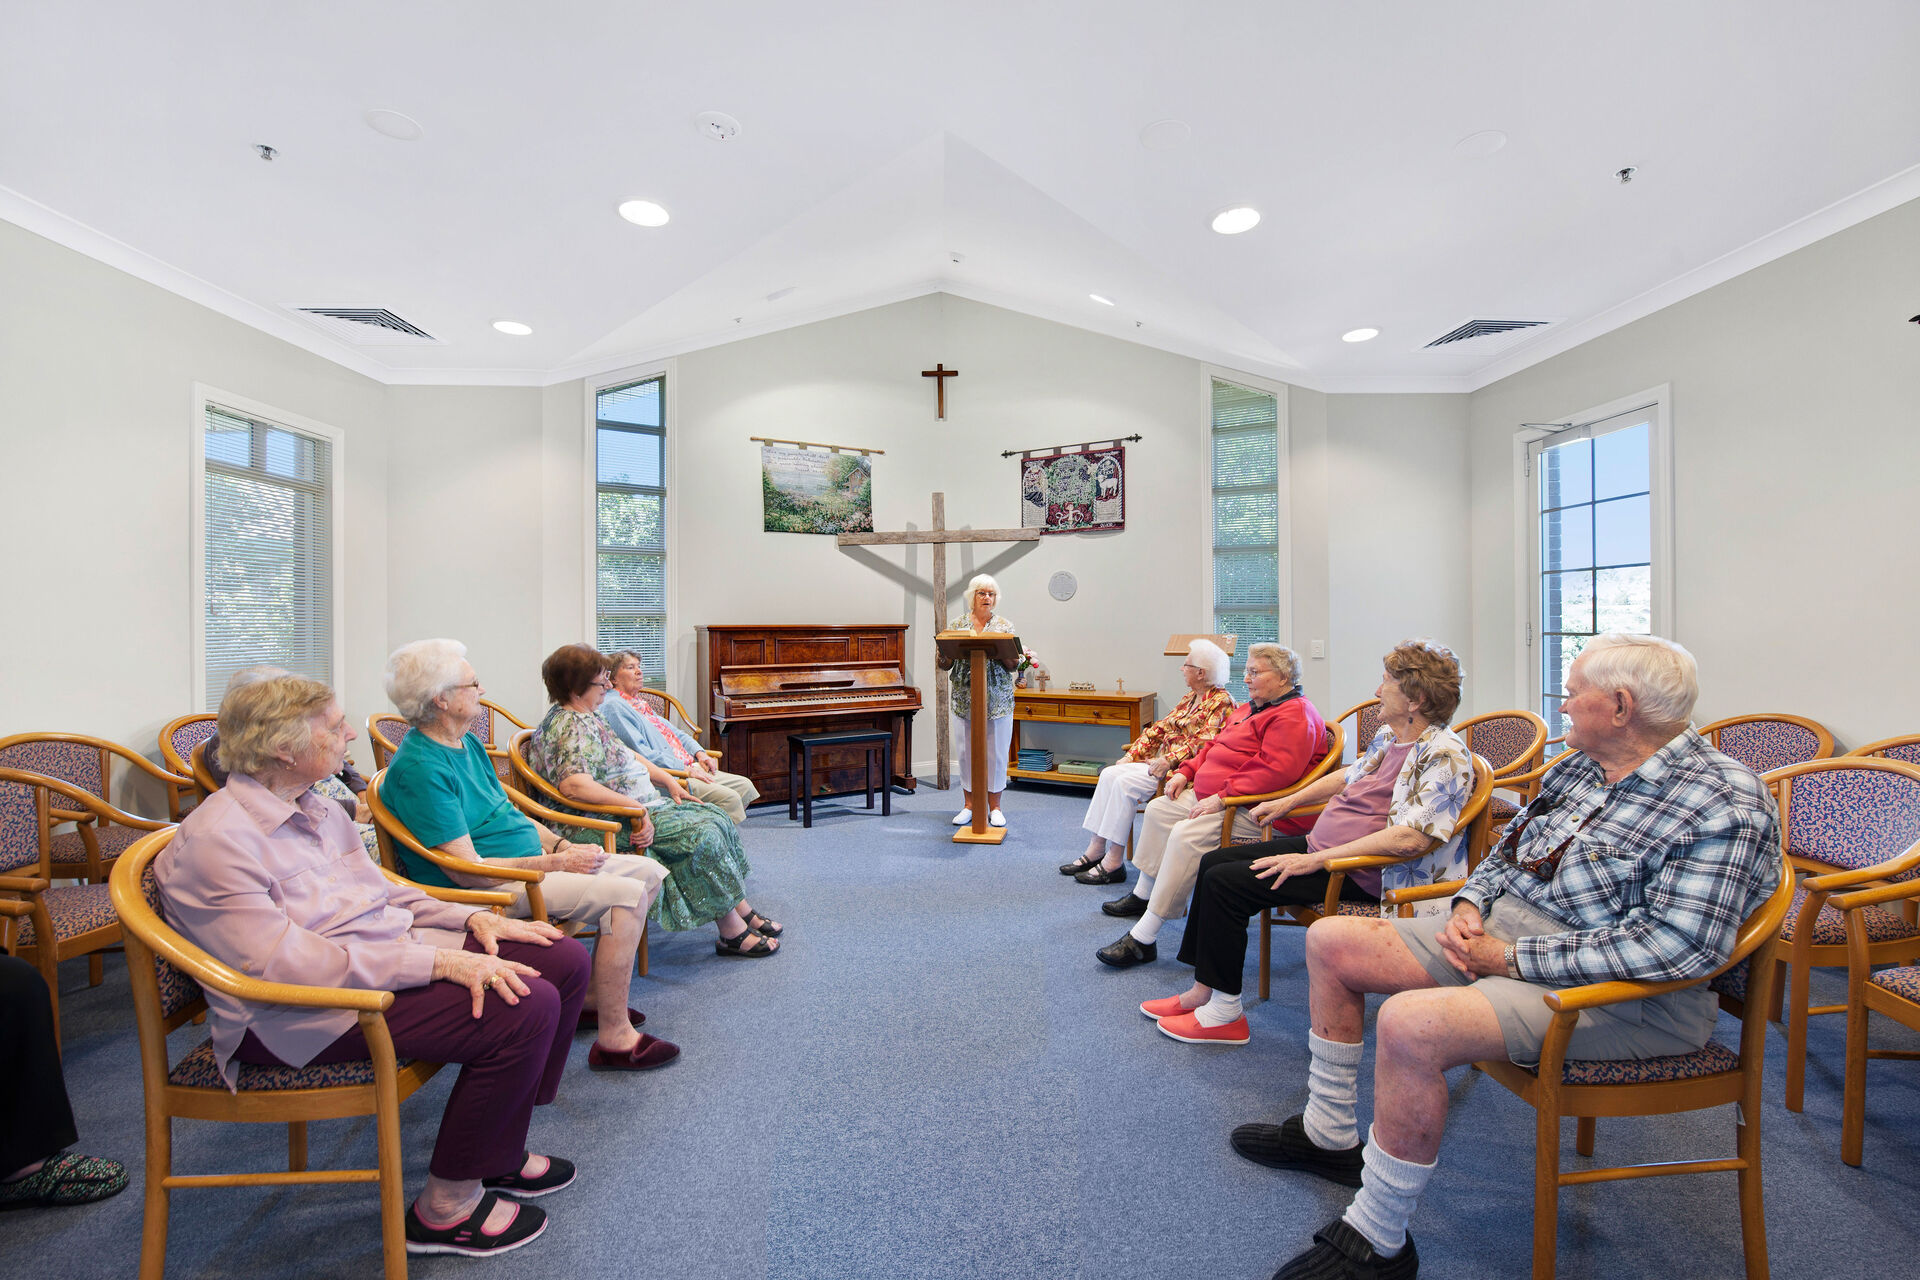 aged care residents of BaptistCare Kularoo aged care home in forster nsw in the residential aged care facility chapel